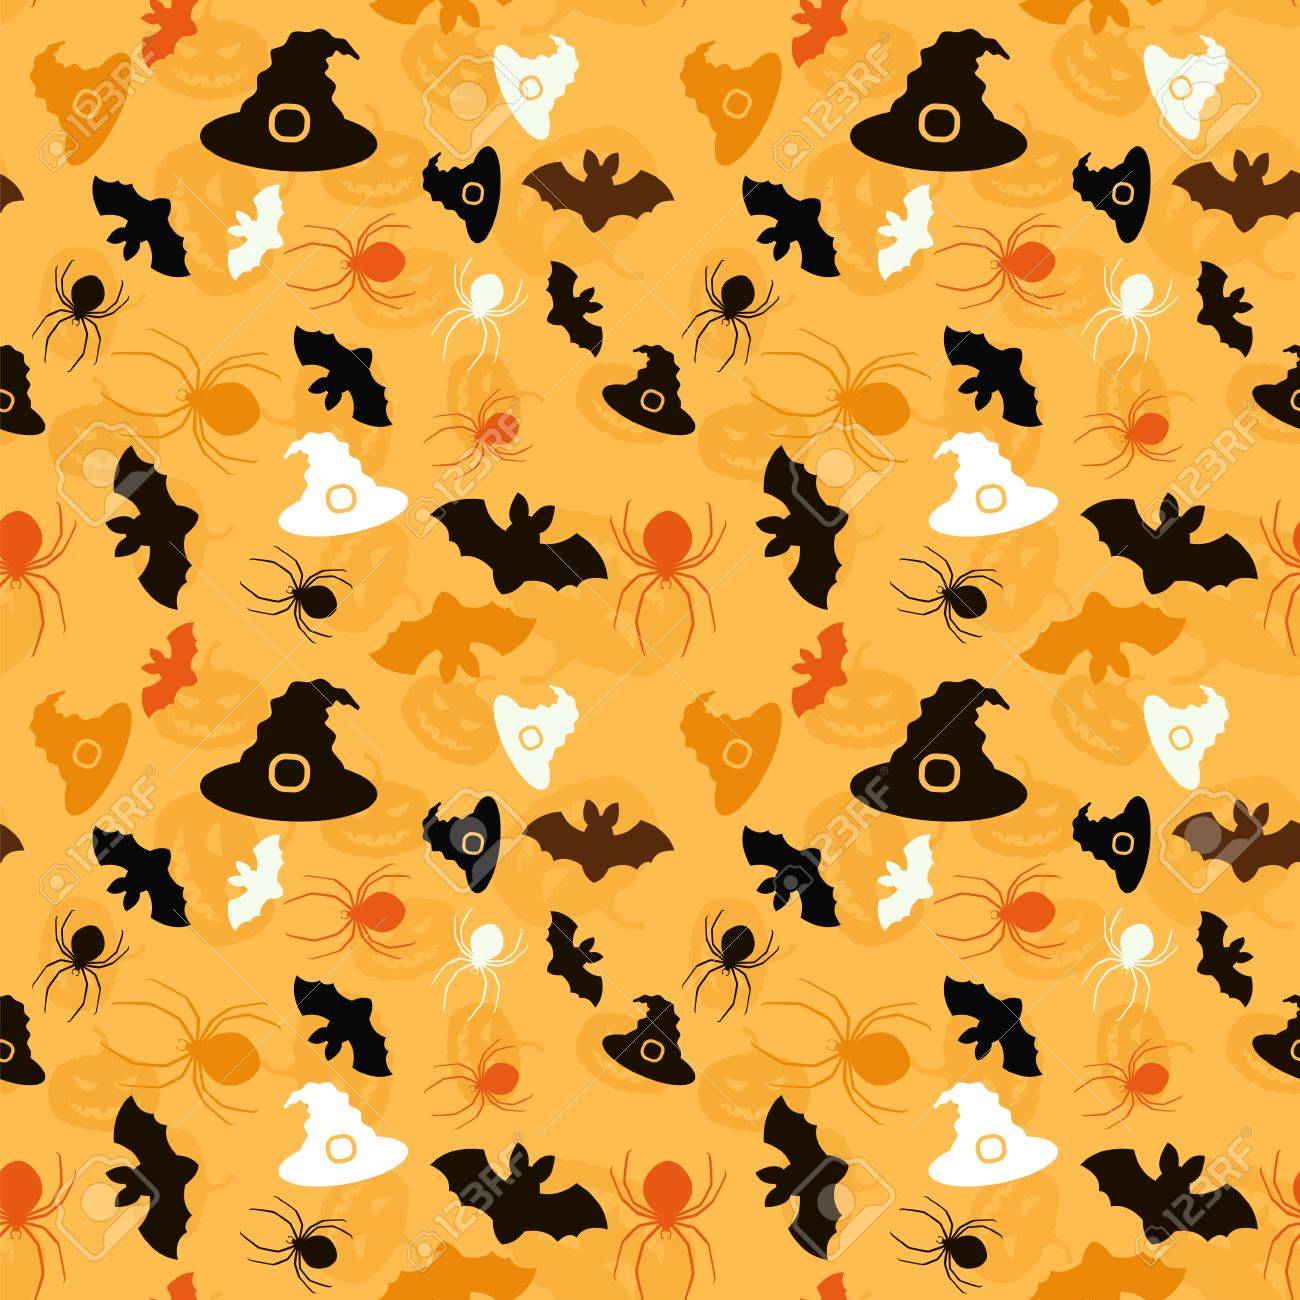 Halloween Seamless Pattern Vector Background Wallpaper With